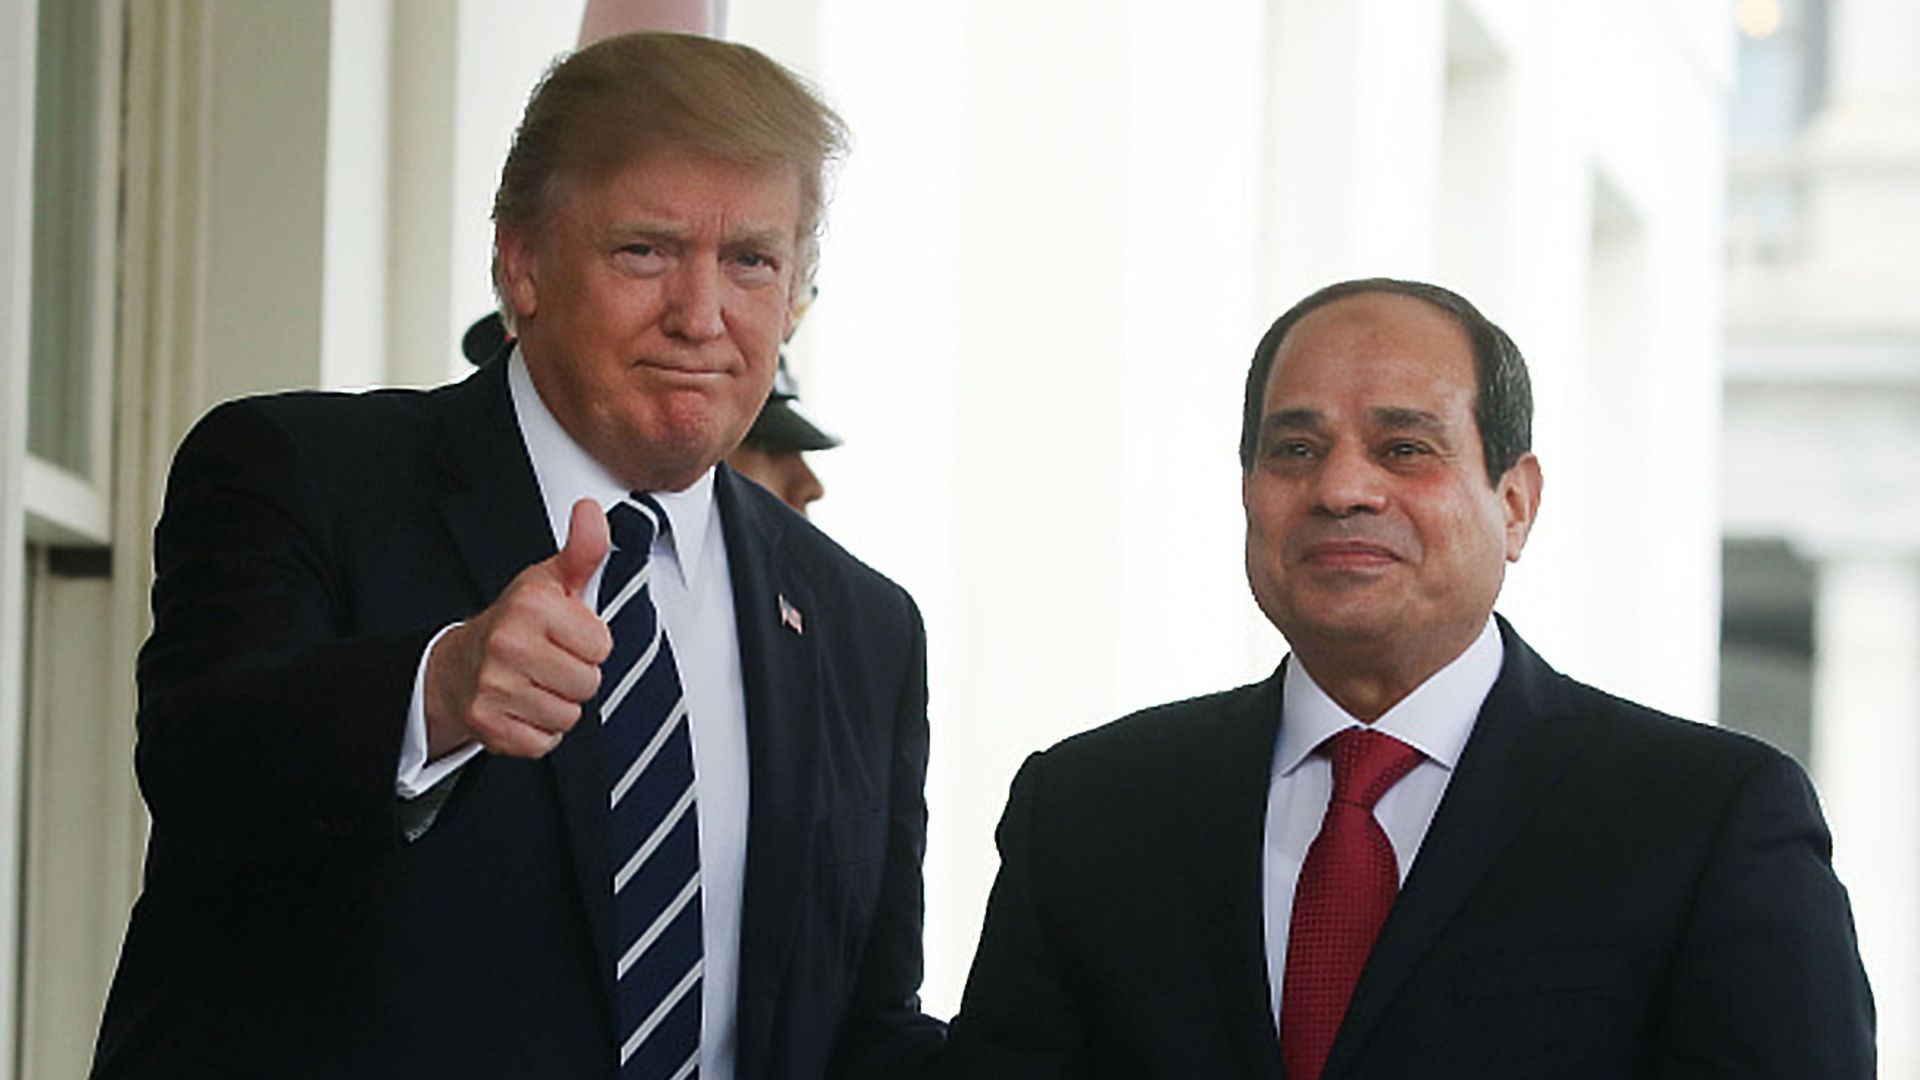 President Trump called Abdel Fattah el-Sisi a "great president" during their meeting on Tuesday.